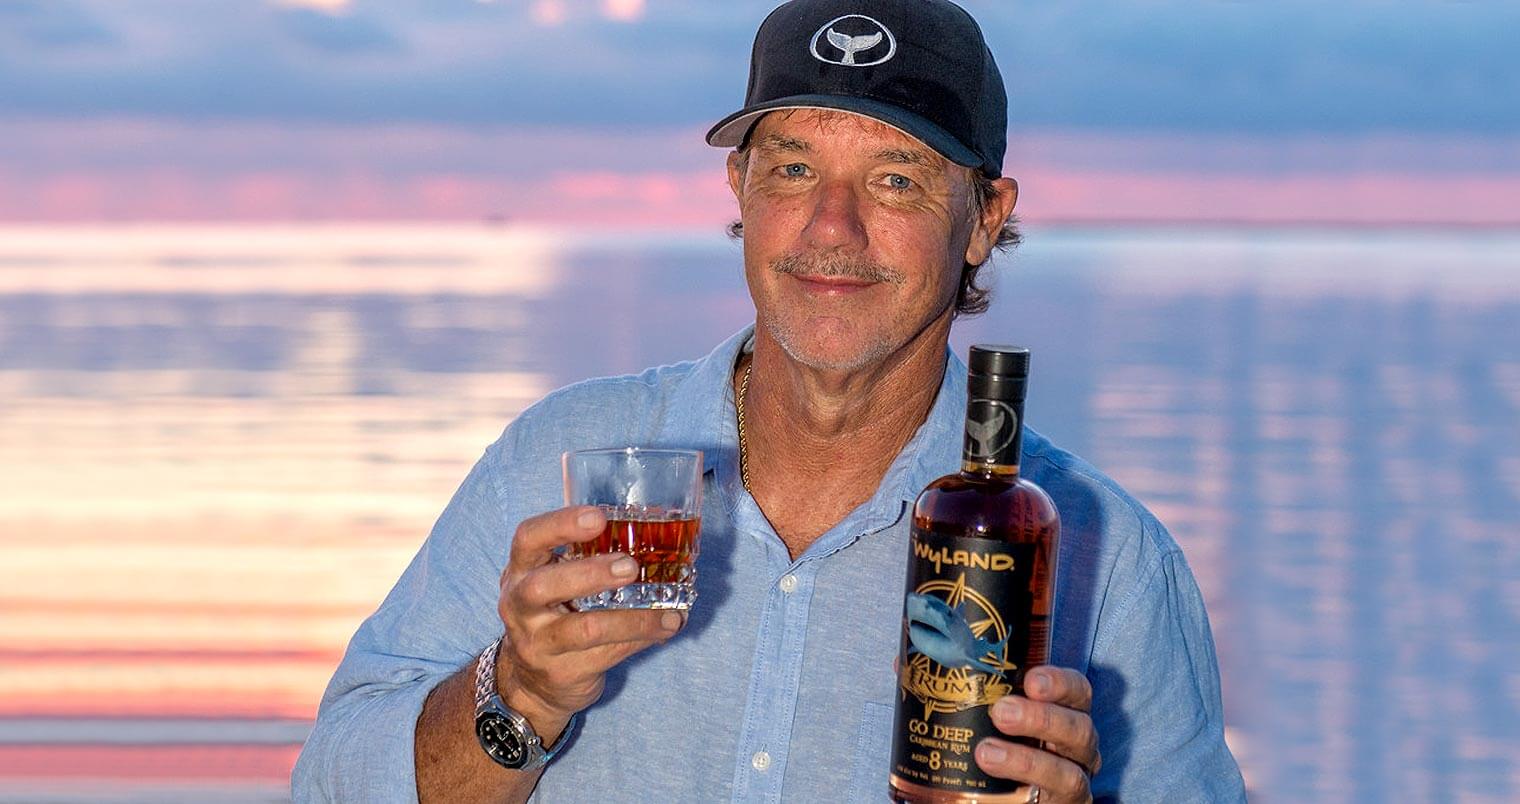 wyland, featured image